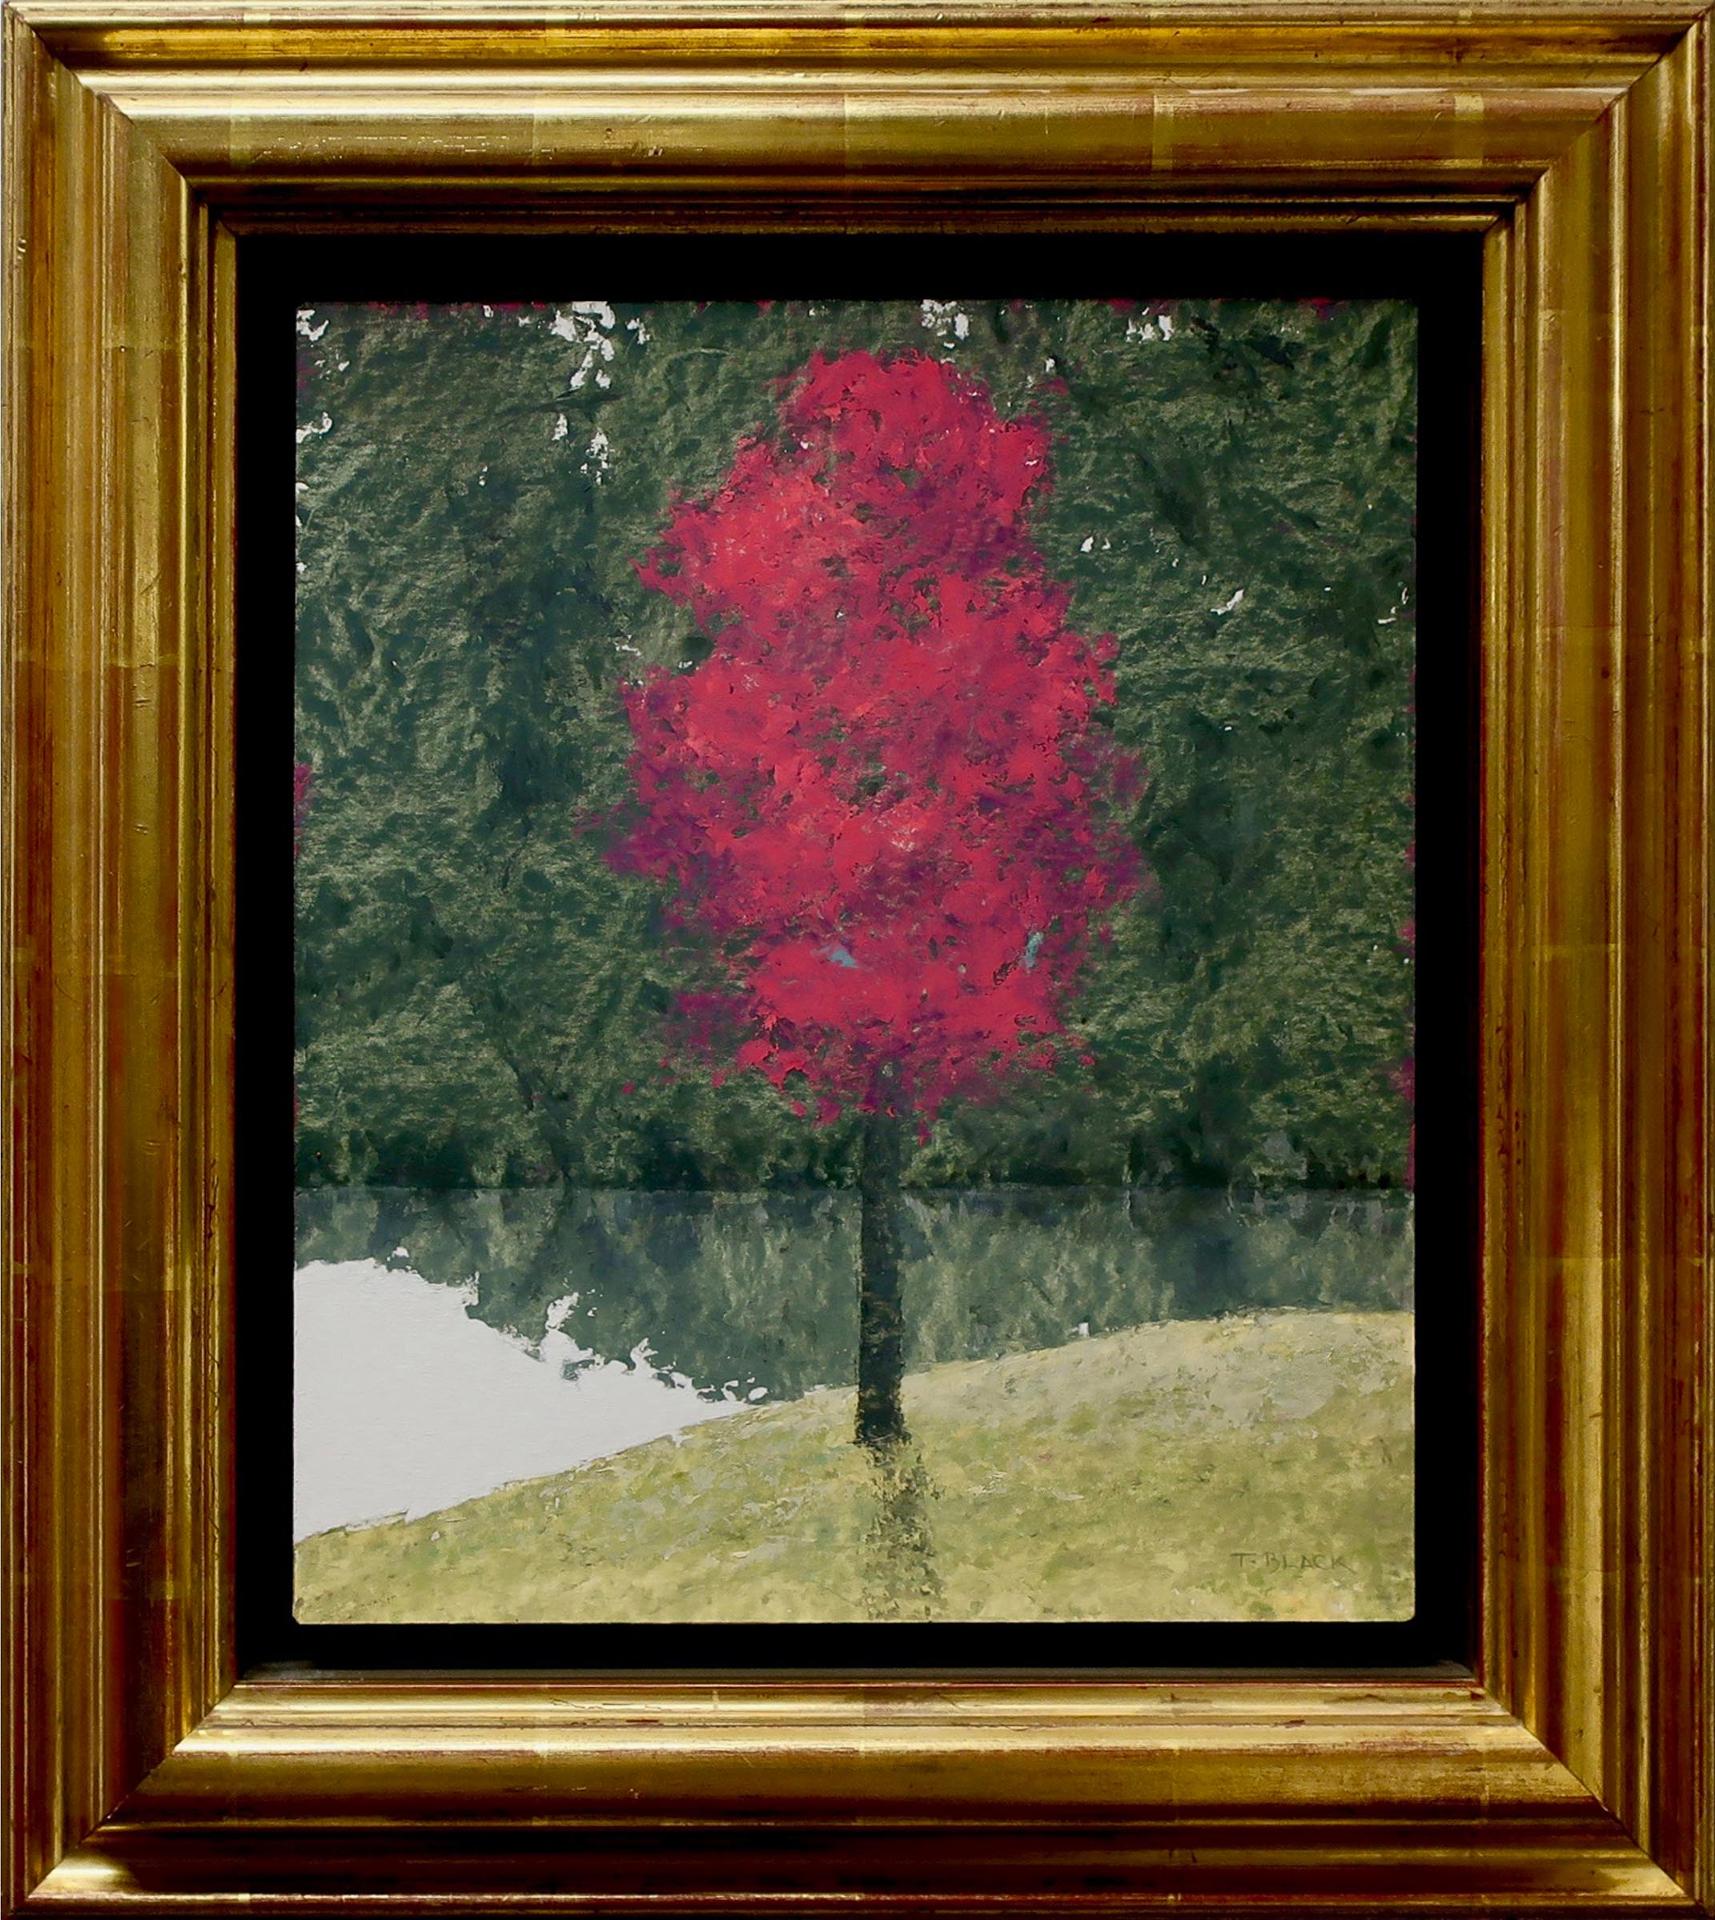 Terry Black - Untitled (The Red Maple)